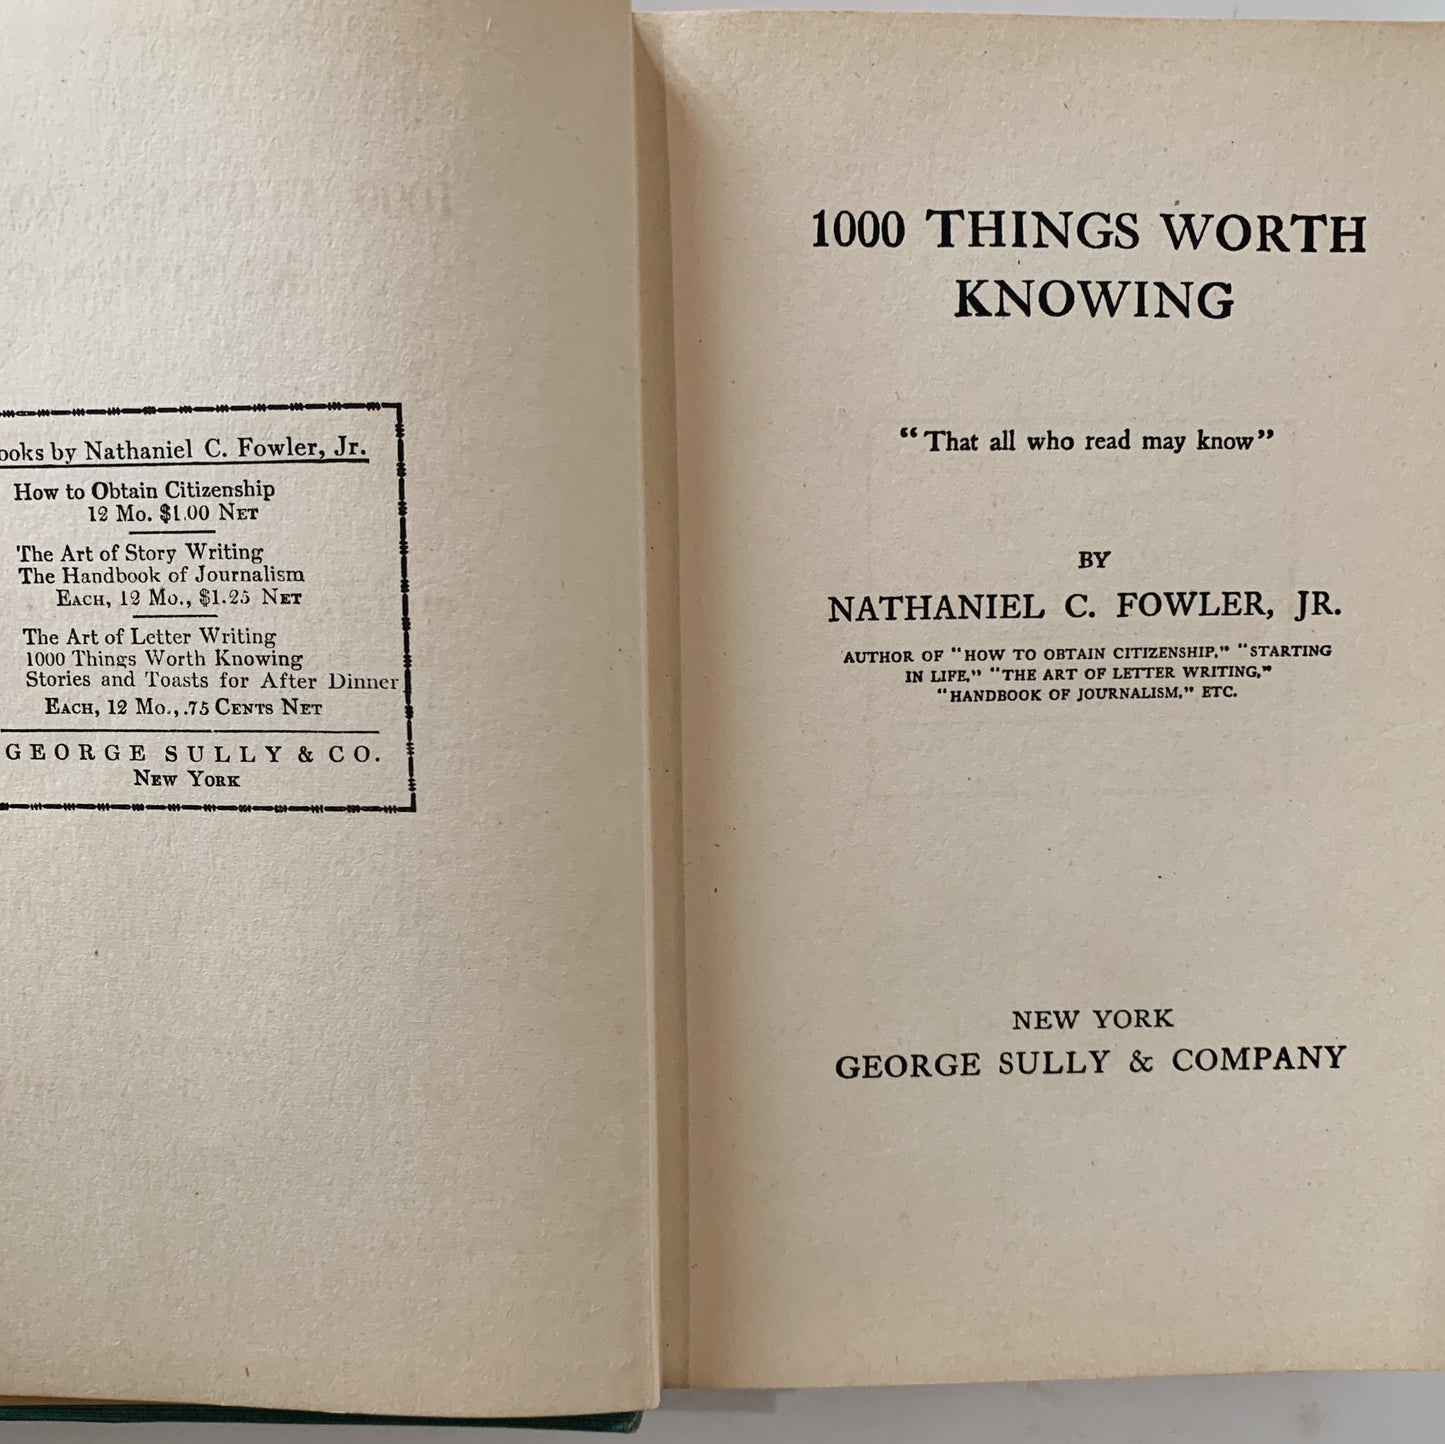 1000 Things Worth Knowing, Nathaniel Fowler, Jr, 1913 Hardcover